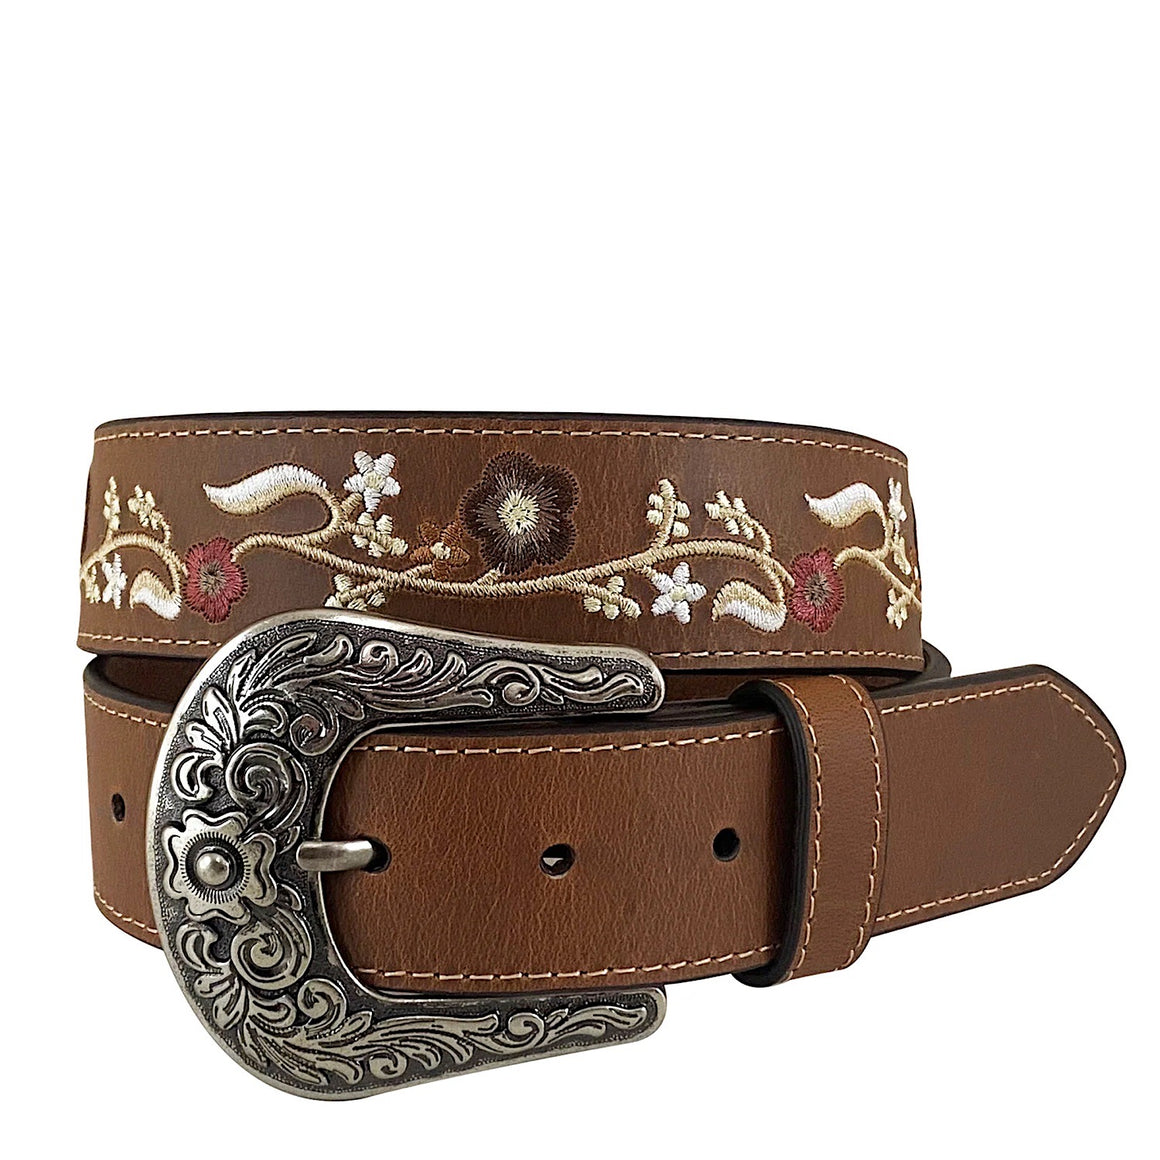 Roper Womens 1.1/2" Floral Embroidered Genuine Leather Belt Tan